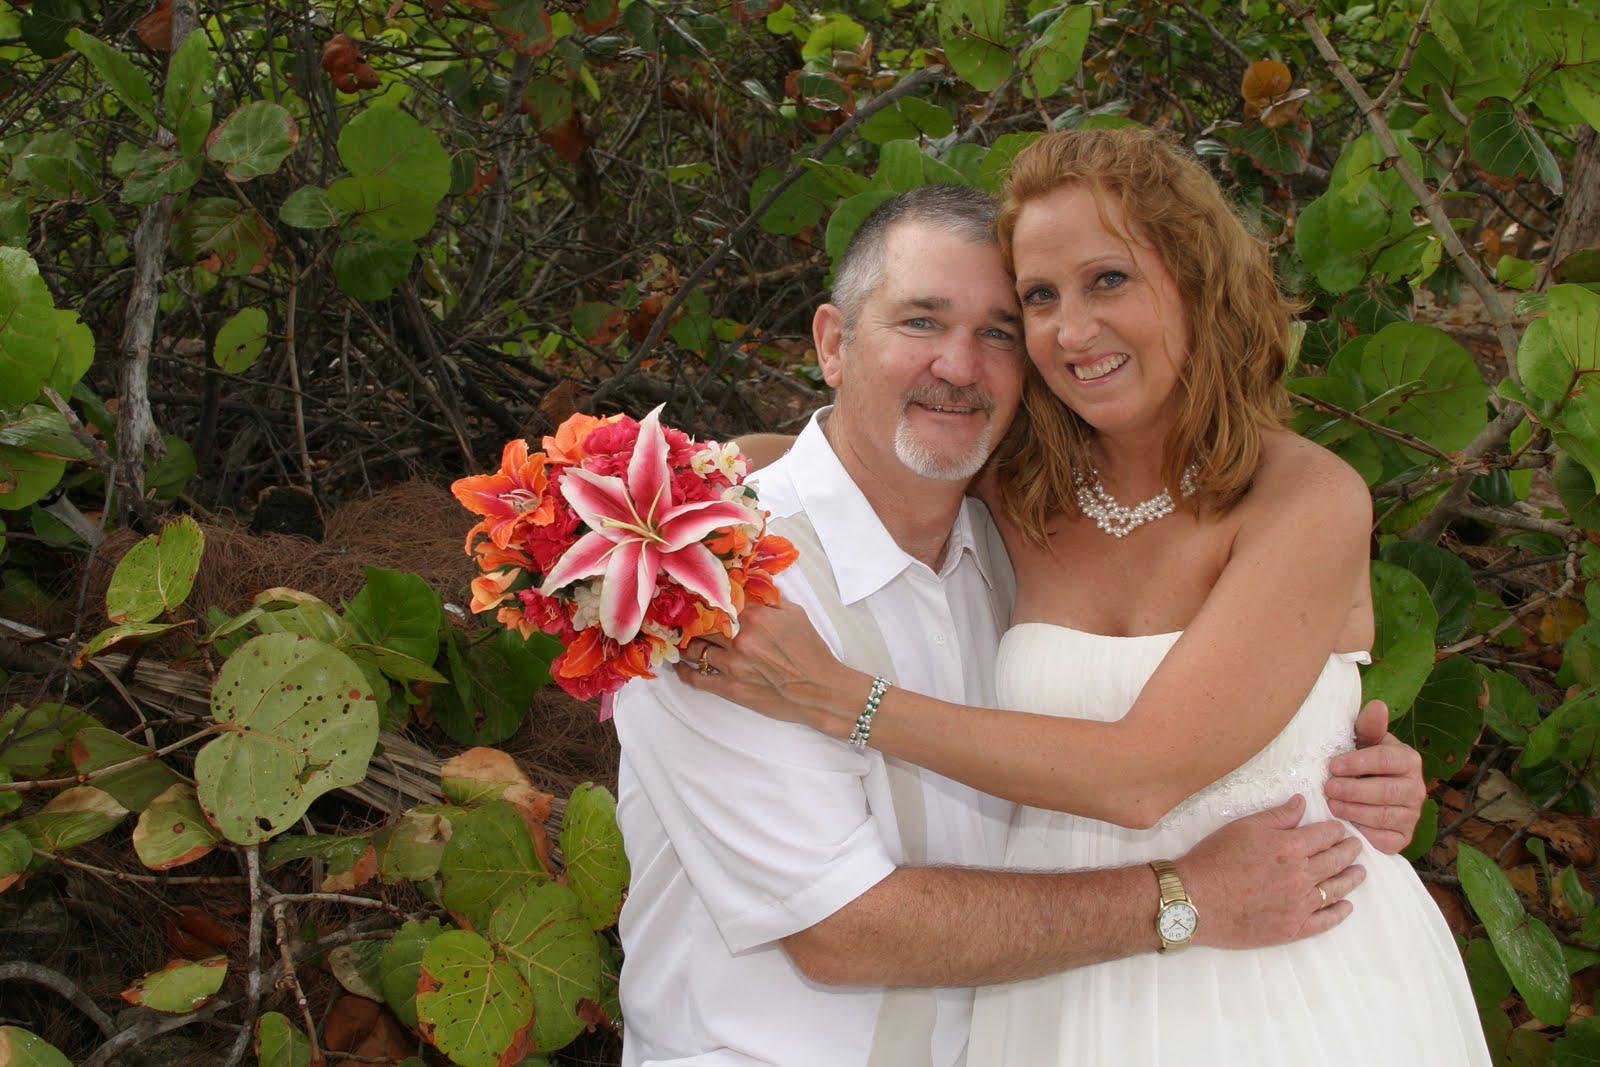 Beach foliage provided a lovely backdrop for this celebrating couple.